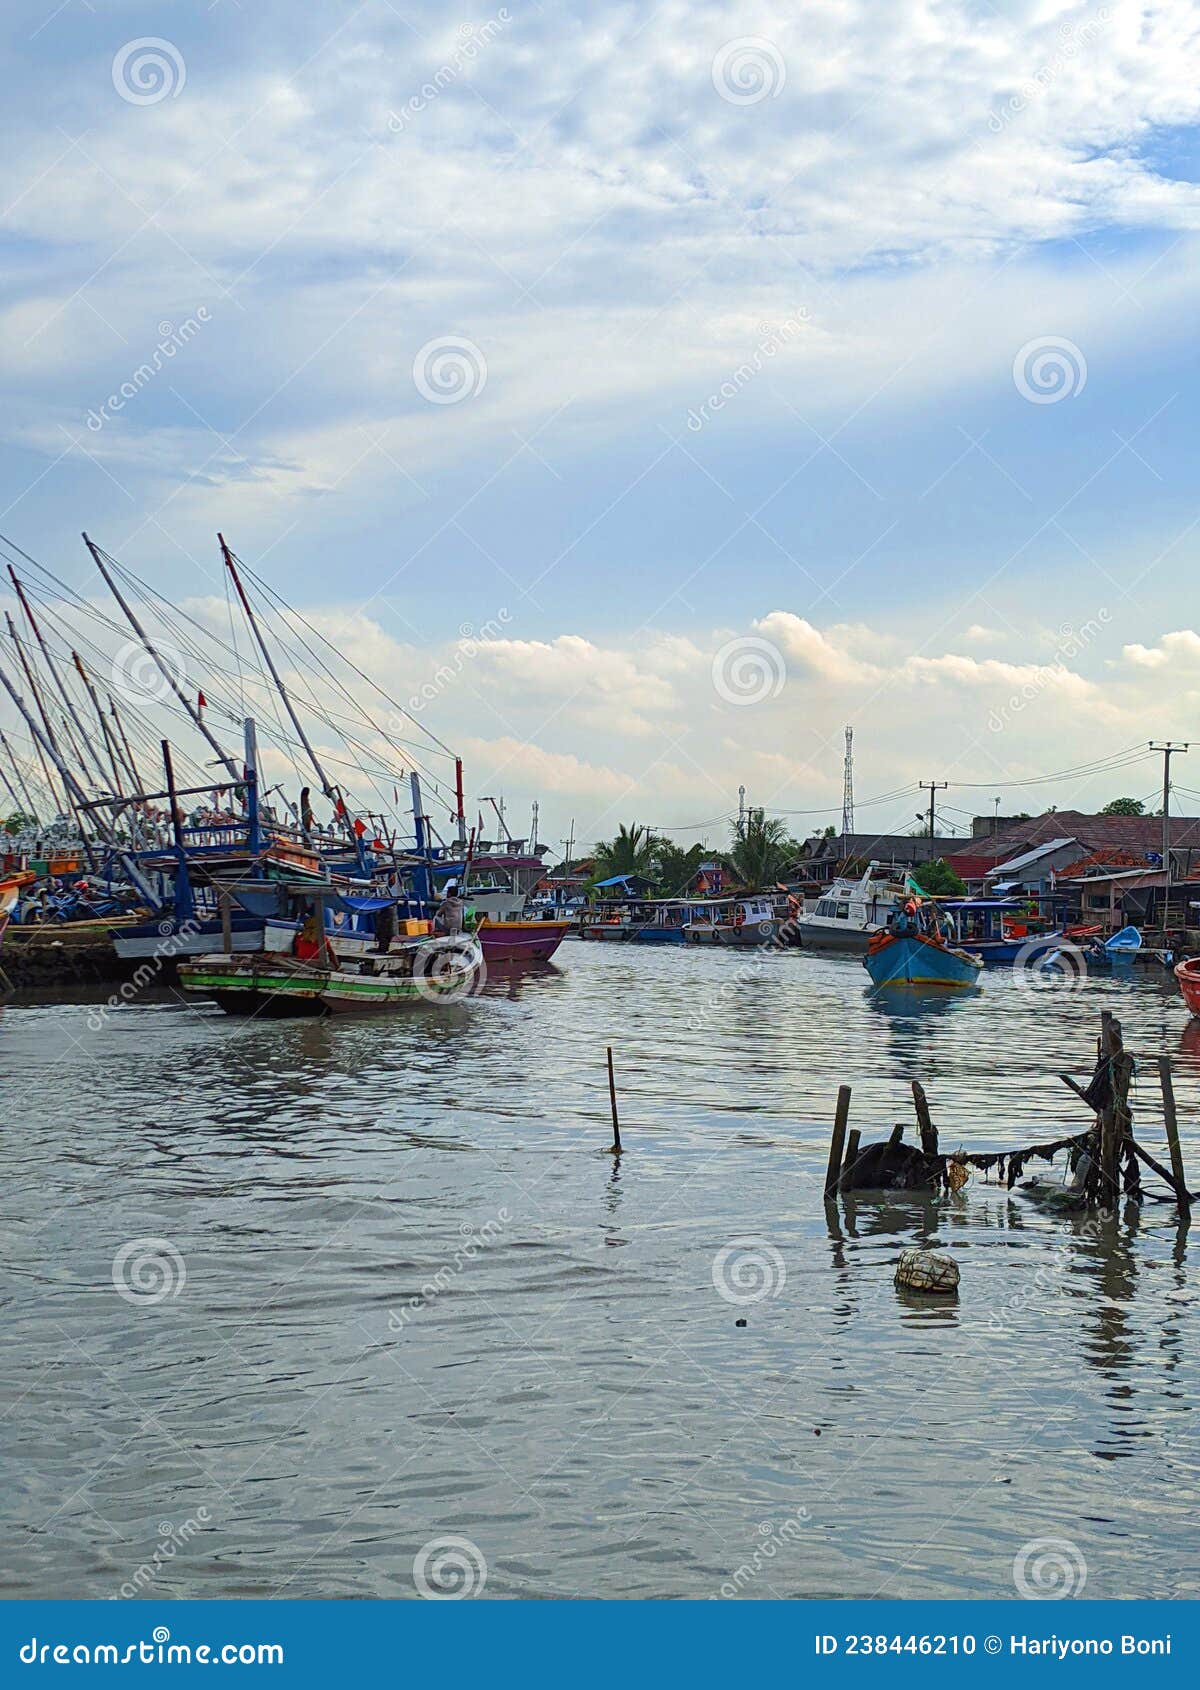 https://thumbs.dreamstime.com/z/fishing-boat-karangantu-banten-traditionally-several-different-types-boats-used-as-to-catch-fish-sea-lakes-rivers-238446210.jpg